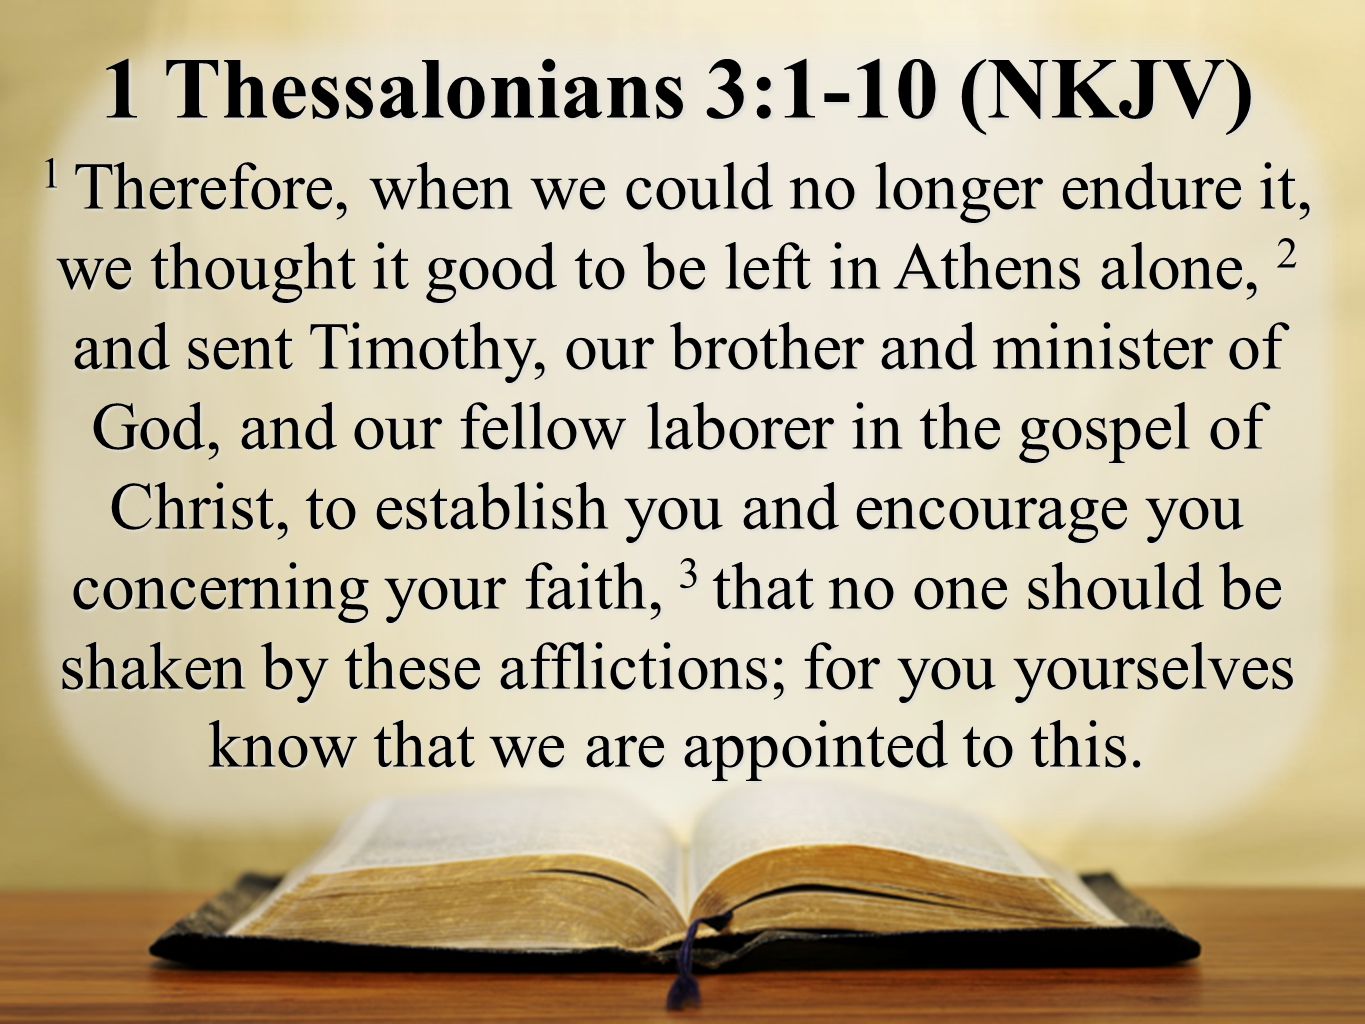 1 Thessalonians 3:1-10 (NKJV) 1 Therefore, when we could no longer endure it, we thought it good to be left in Athens alone, 2 and sent Timothy, our brother and minister of God, and our fellow laborer in the gospel of Christ, to establish you and encourage you concerning your faith, 3 that no one should be shaken by these afflictions; for you yourselves know that we are appointed to this.